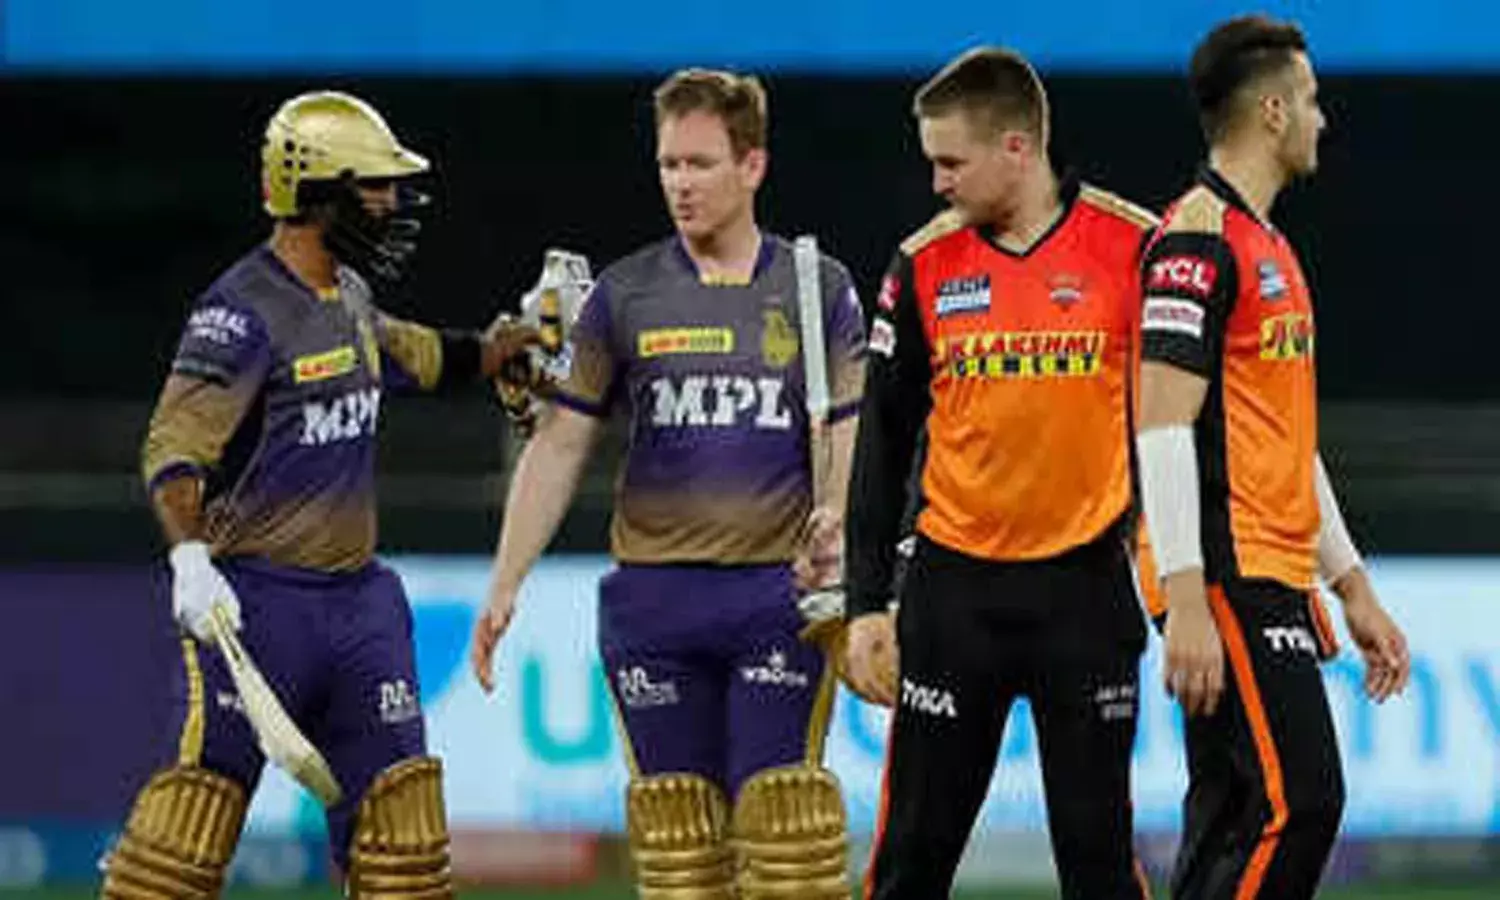 Kolkatas Knights at the end of the tunnel after defeating SRH by 6 wickets